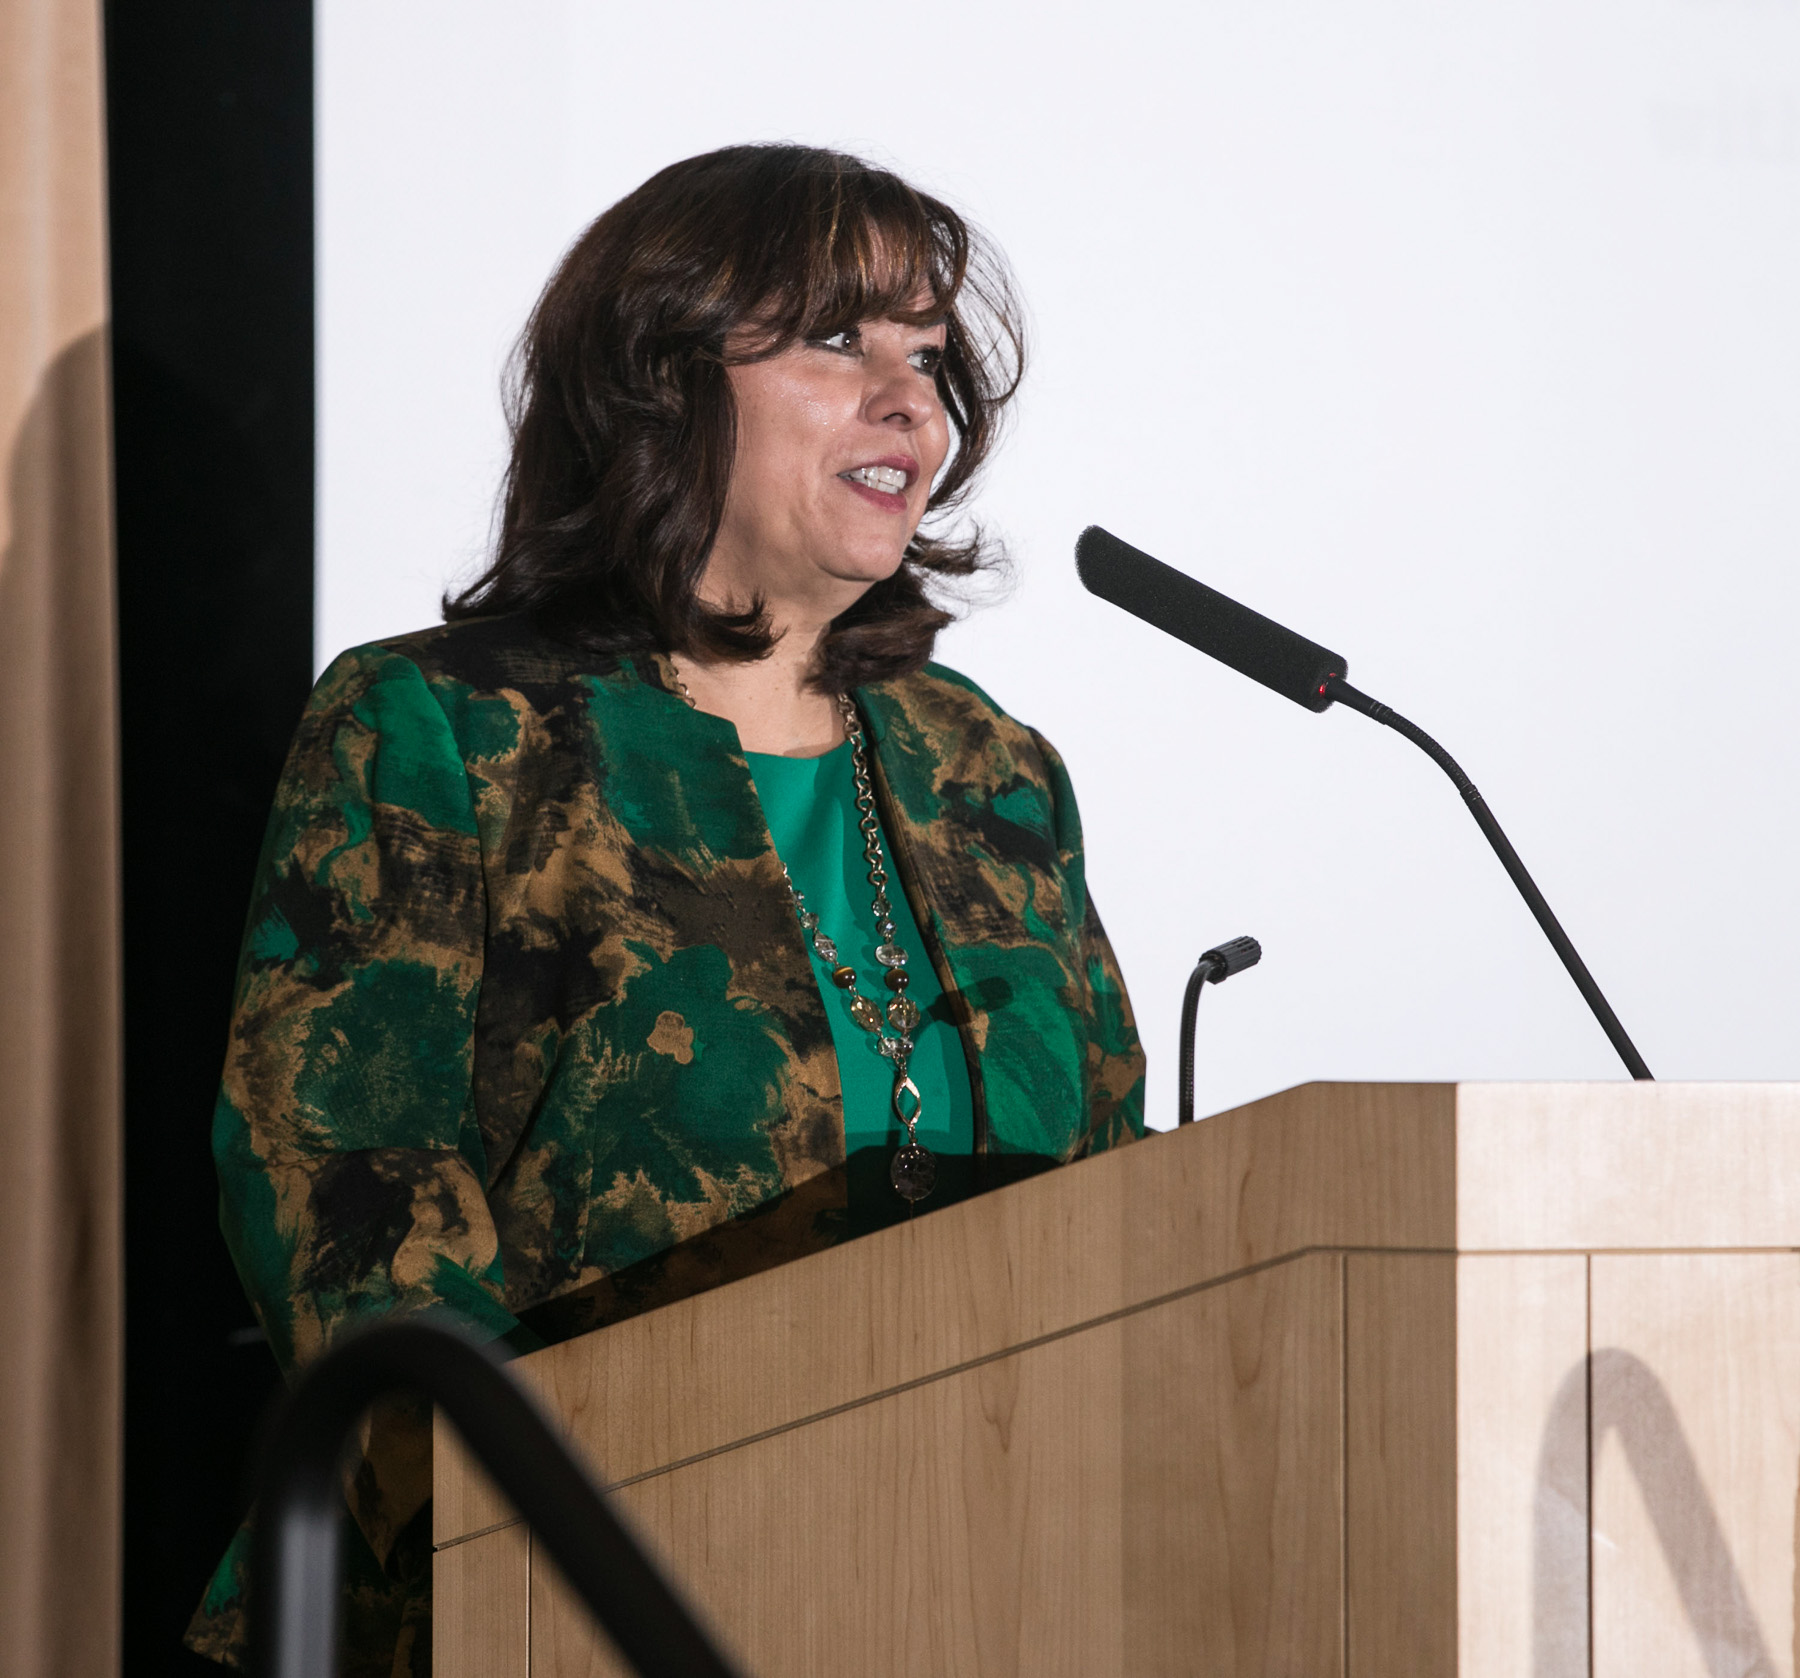 Elizabeth Ortiz, vice president of the Office of Institutional Diversity and Equity, welcomes members of the university community as they gather at the Lincoln Park Student Center to honor Latina activist Dolores Huerta. (DePaul University/Jamie Moncrief)